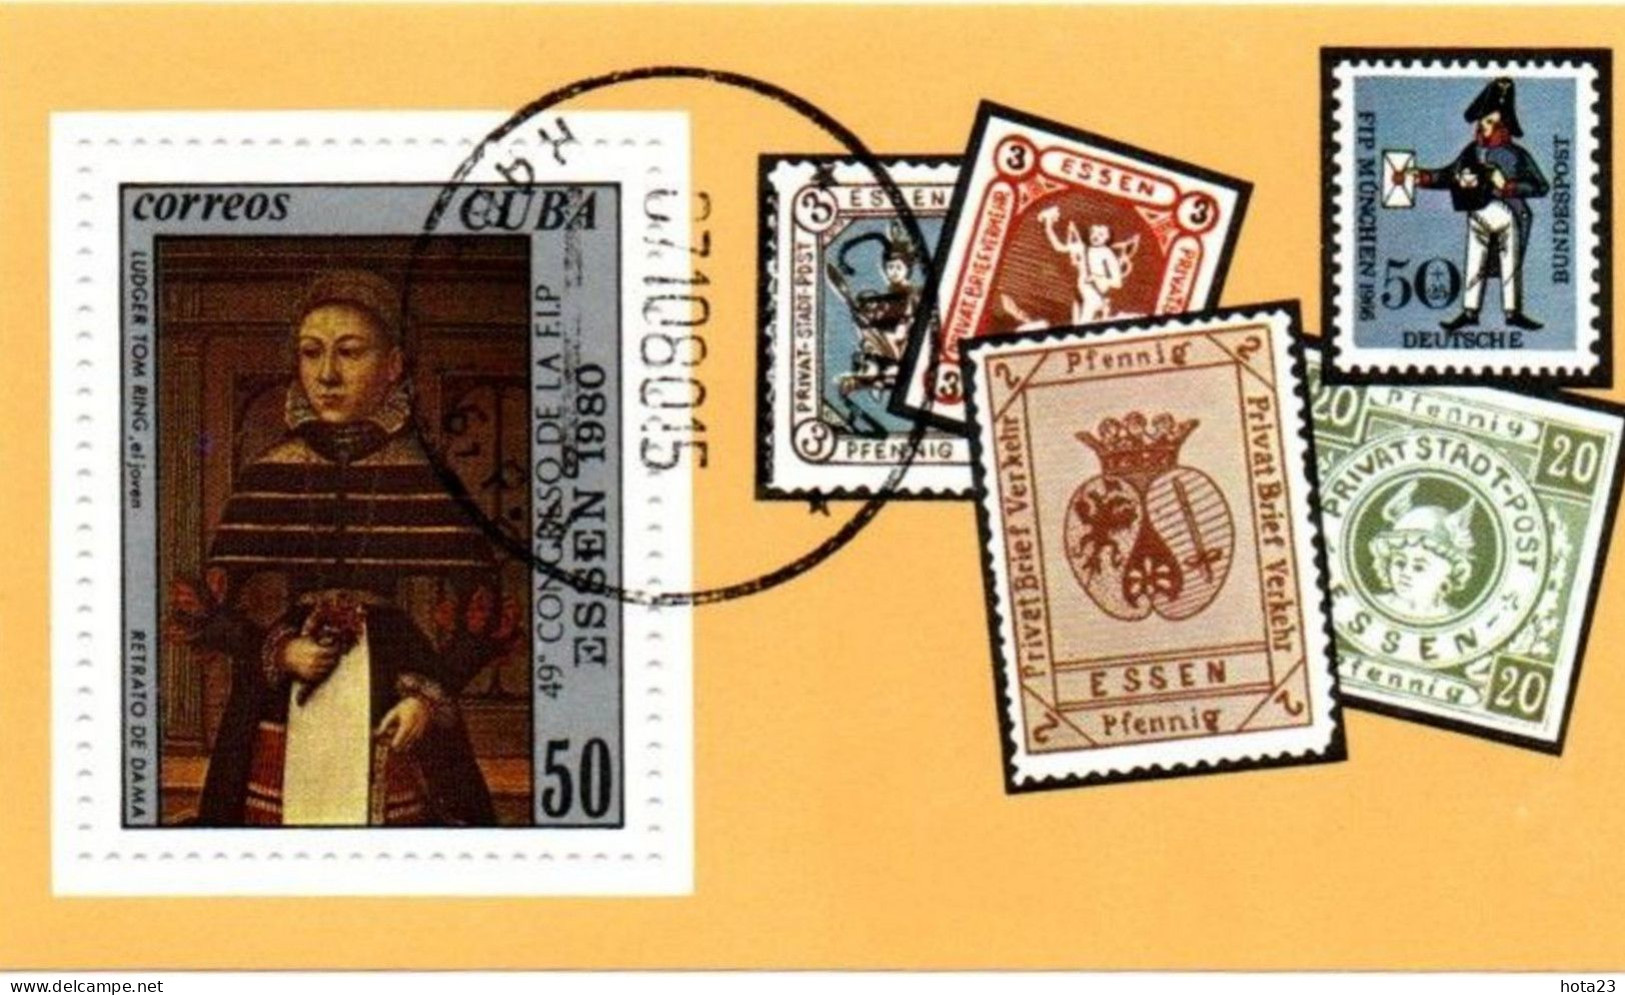 (!) CUBA 1980 STAMP ON STAMPS ESSEN - Germany 1980 EXHIBITION Painting Portrait Of A Lady, Ludger Tom Ring MI BL 64 - Gebruikt